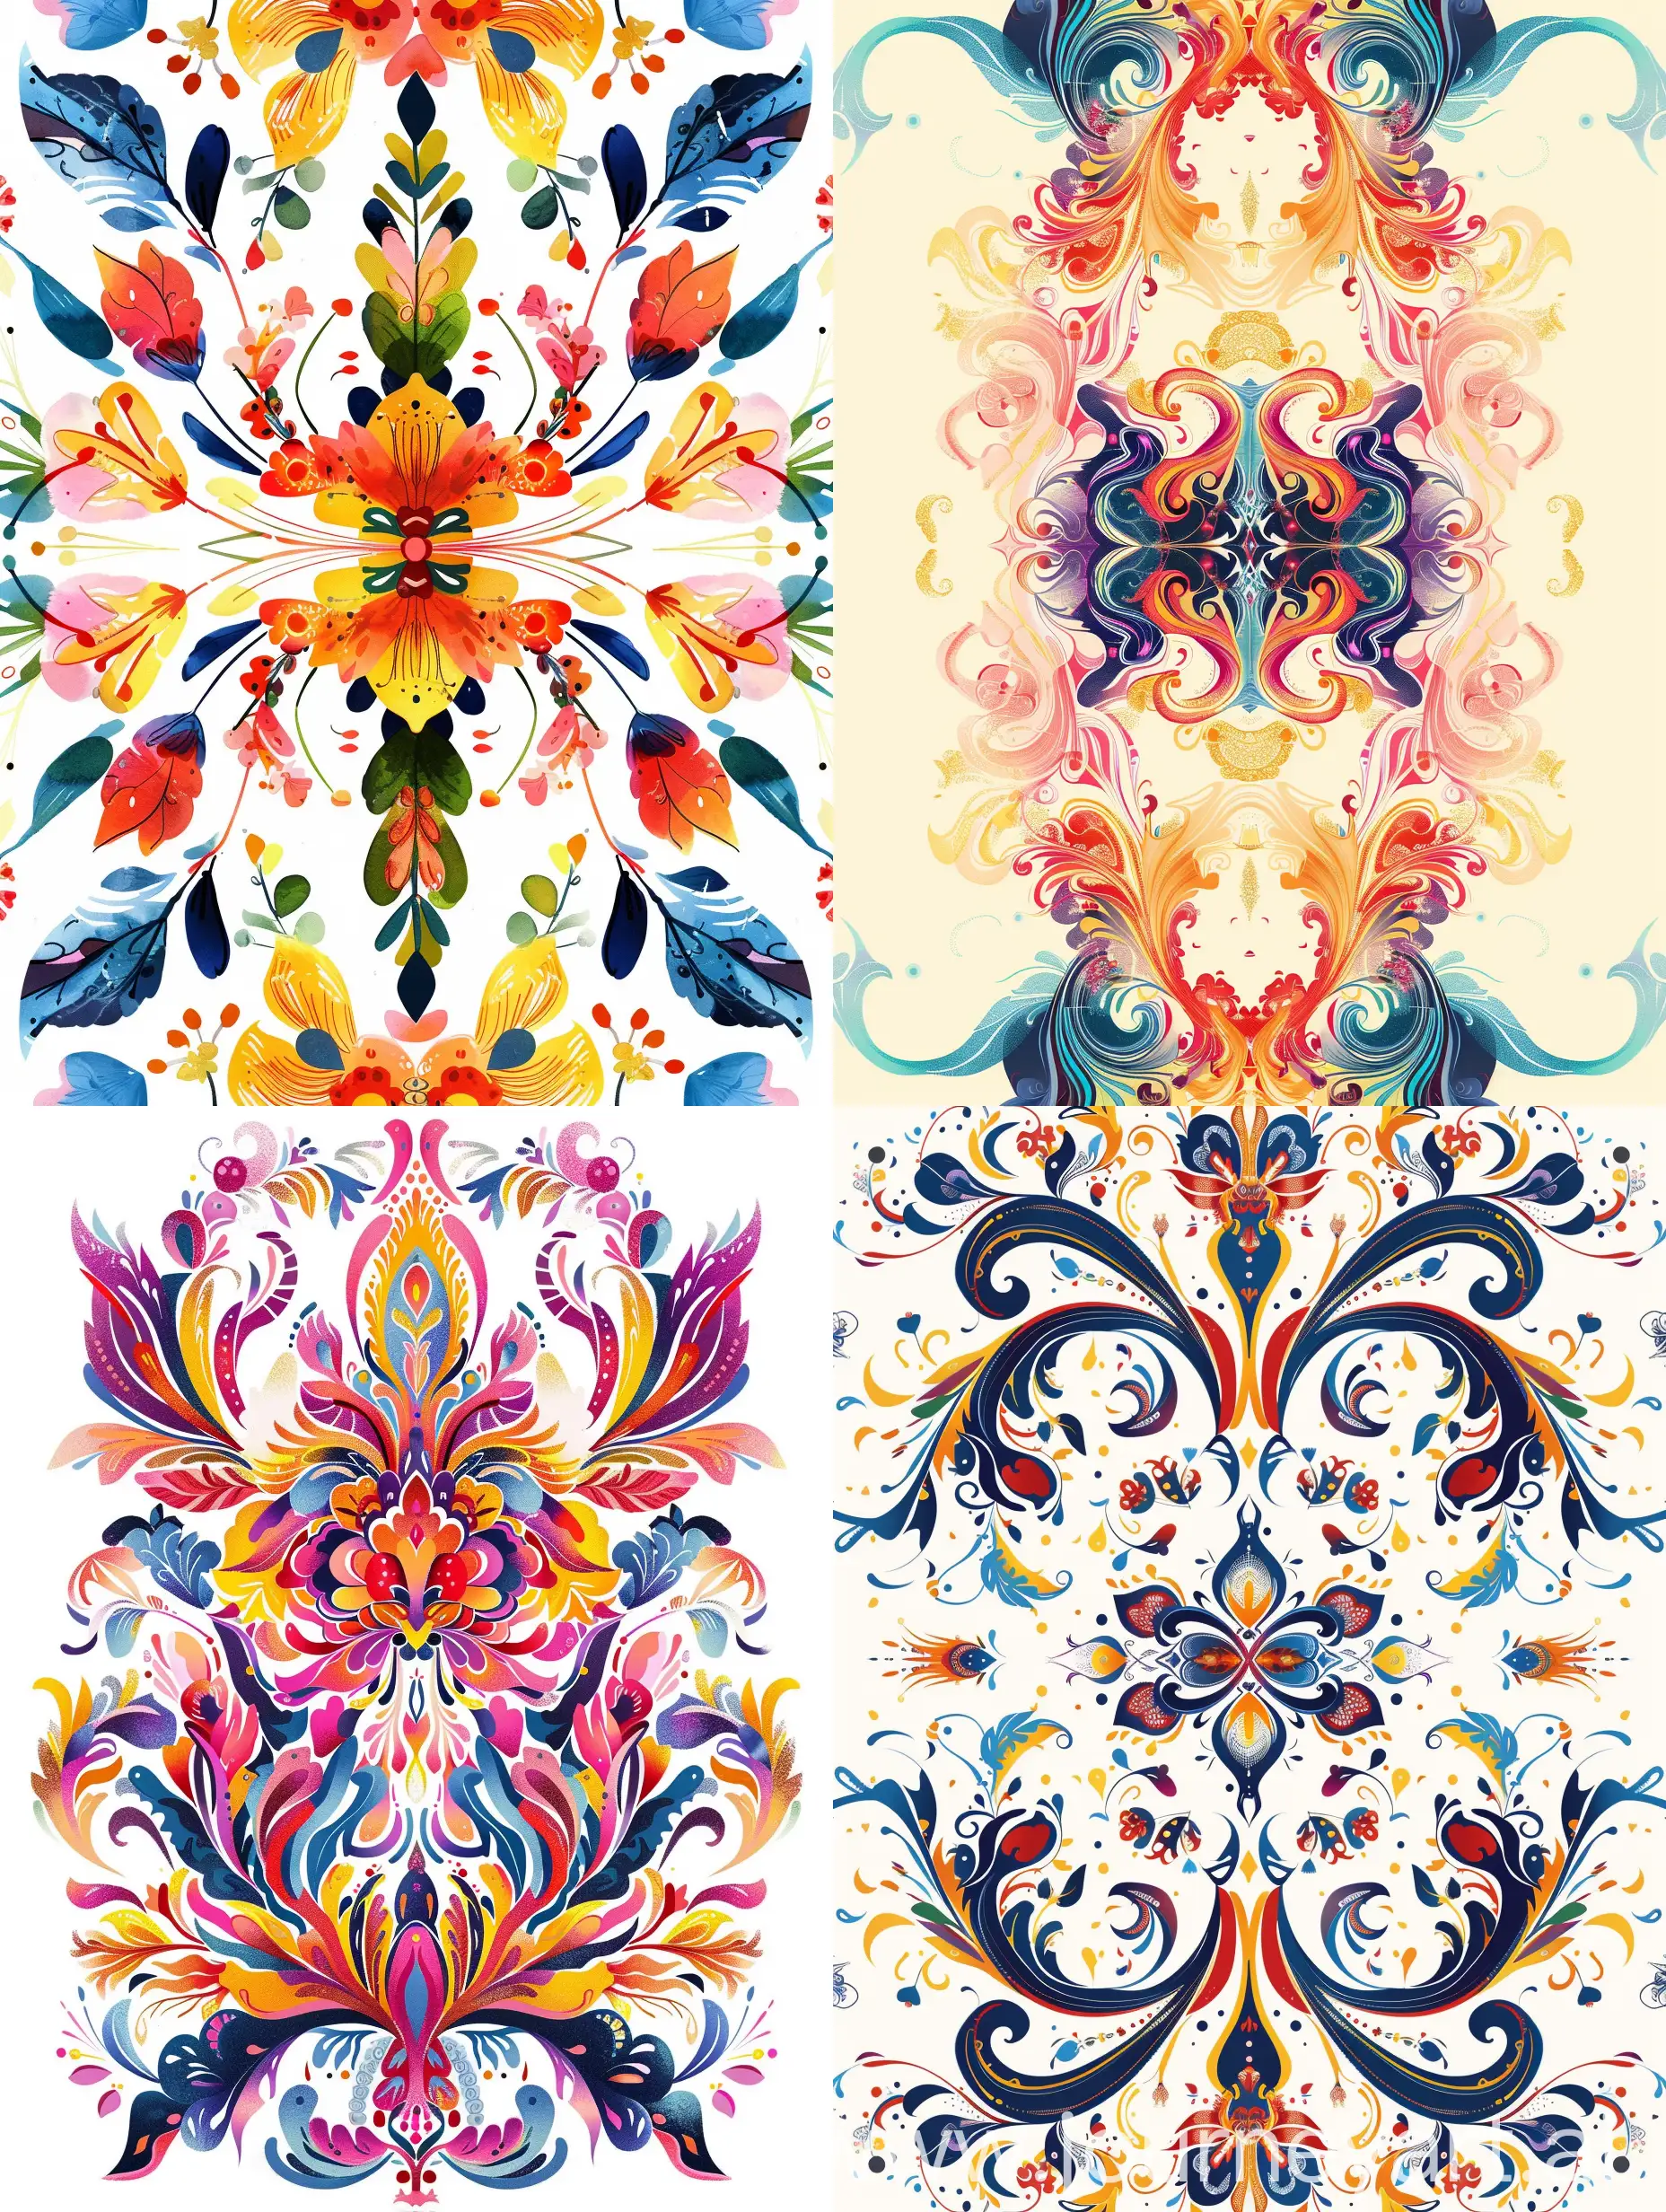 Ornamental royal, reflected vertically, smooth lines, natural summer motifs, bright complex colors, on a white background, few details, VictoriNgai style